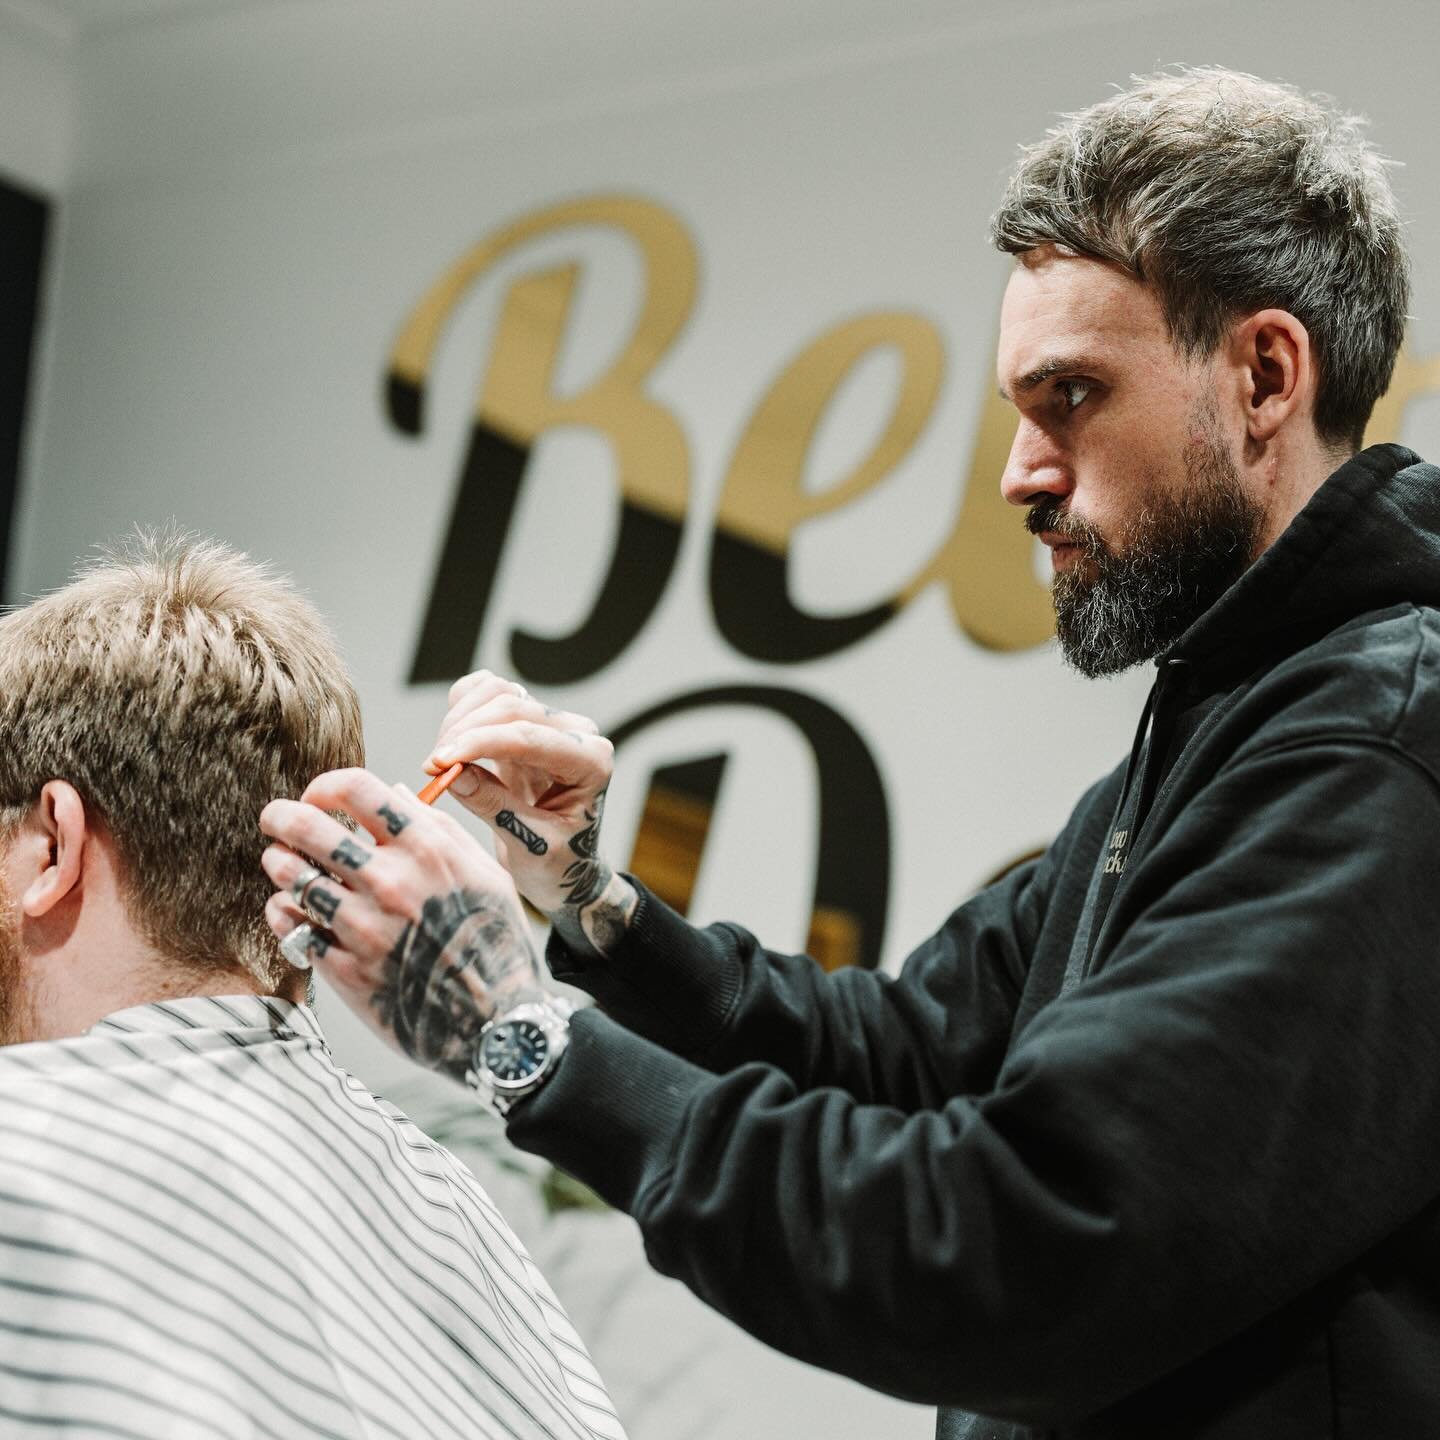 Not everything happens IN the studio&hellip; did you know that we also create photo and video content all over Scotland? 🏴󠁧󠁢󠁳󠁣󠁴󠁿 Shoutout to our stylish client Below Decks Co. ✂️⚓️ We Are 10. ✖️ #photography #barber #photographer #contentmarke